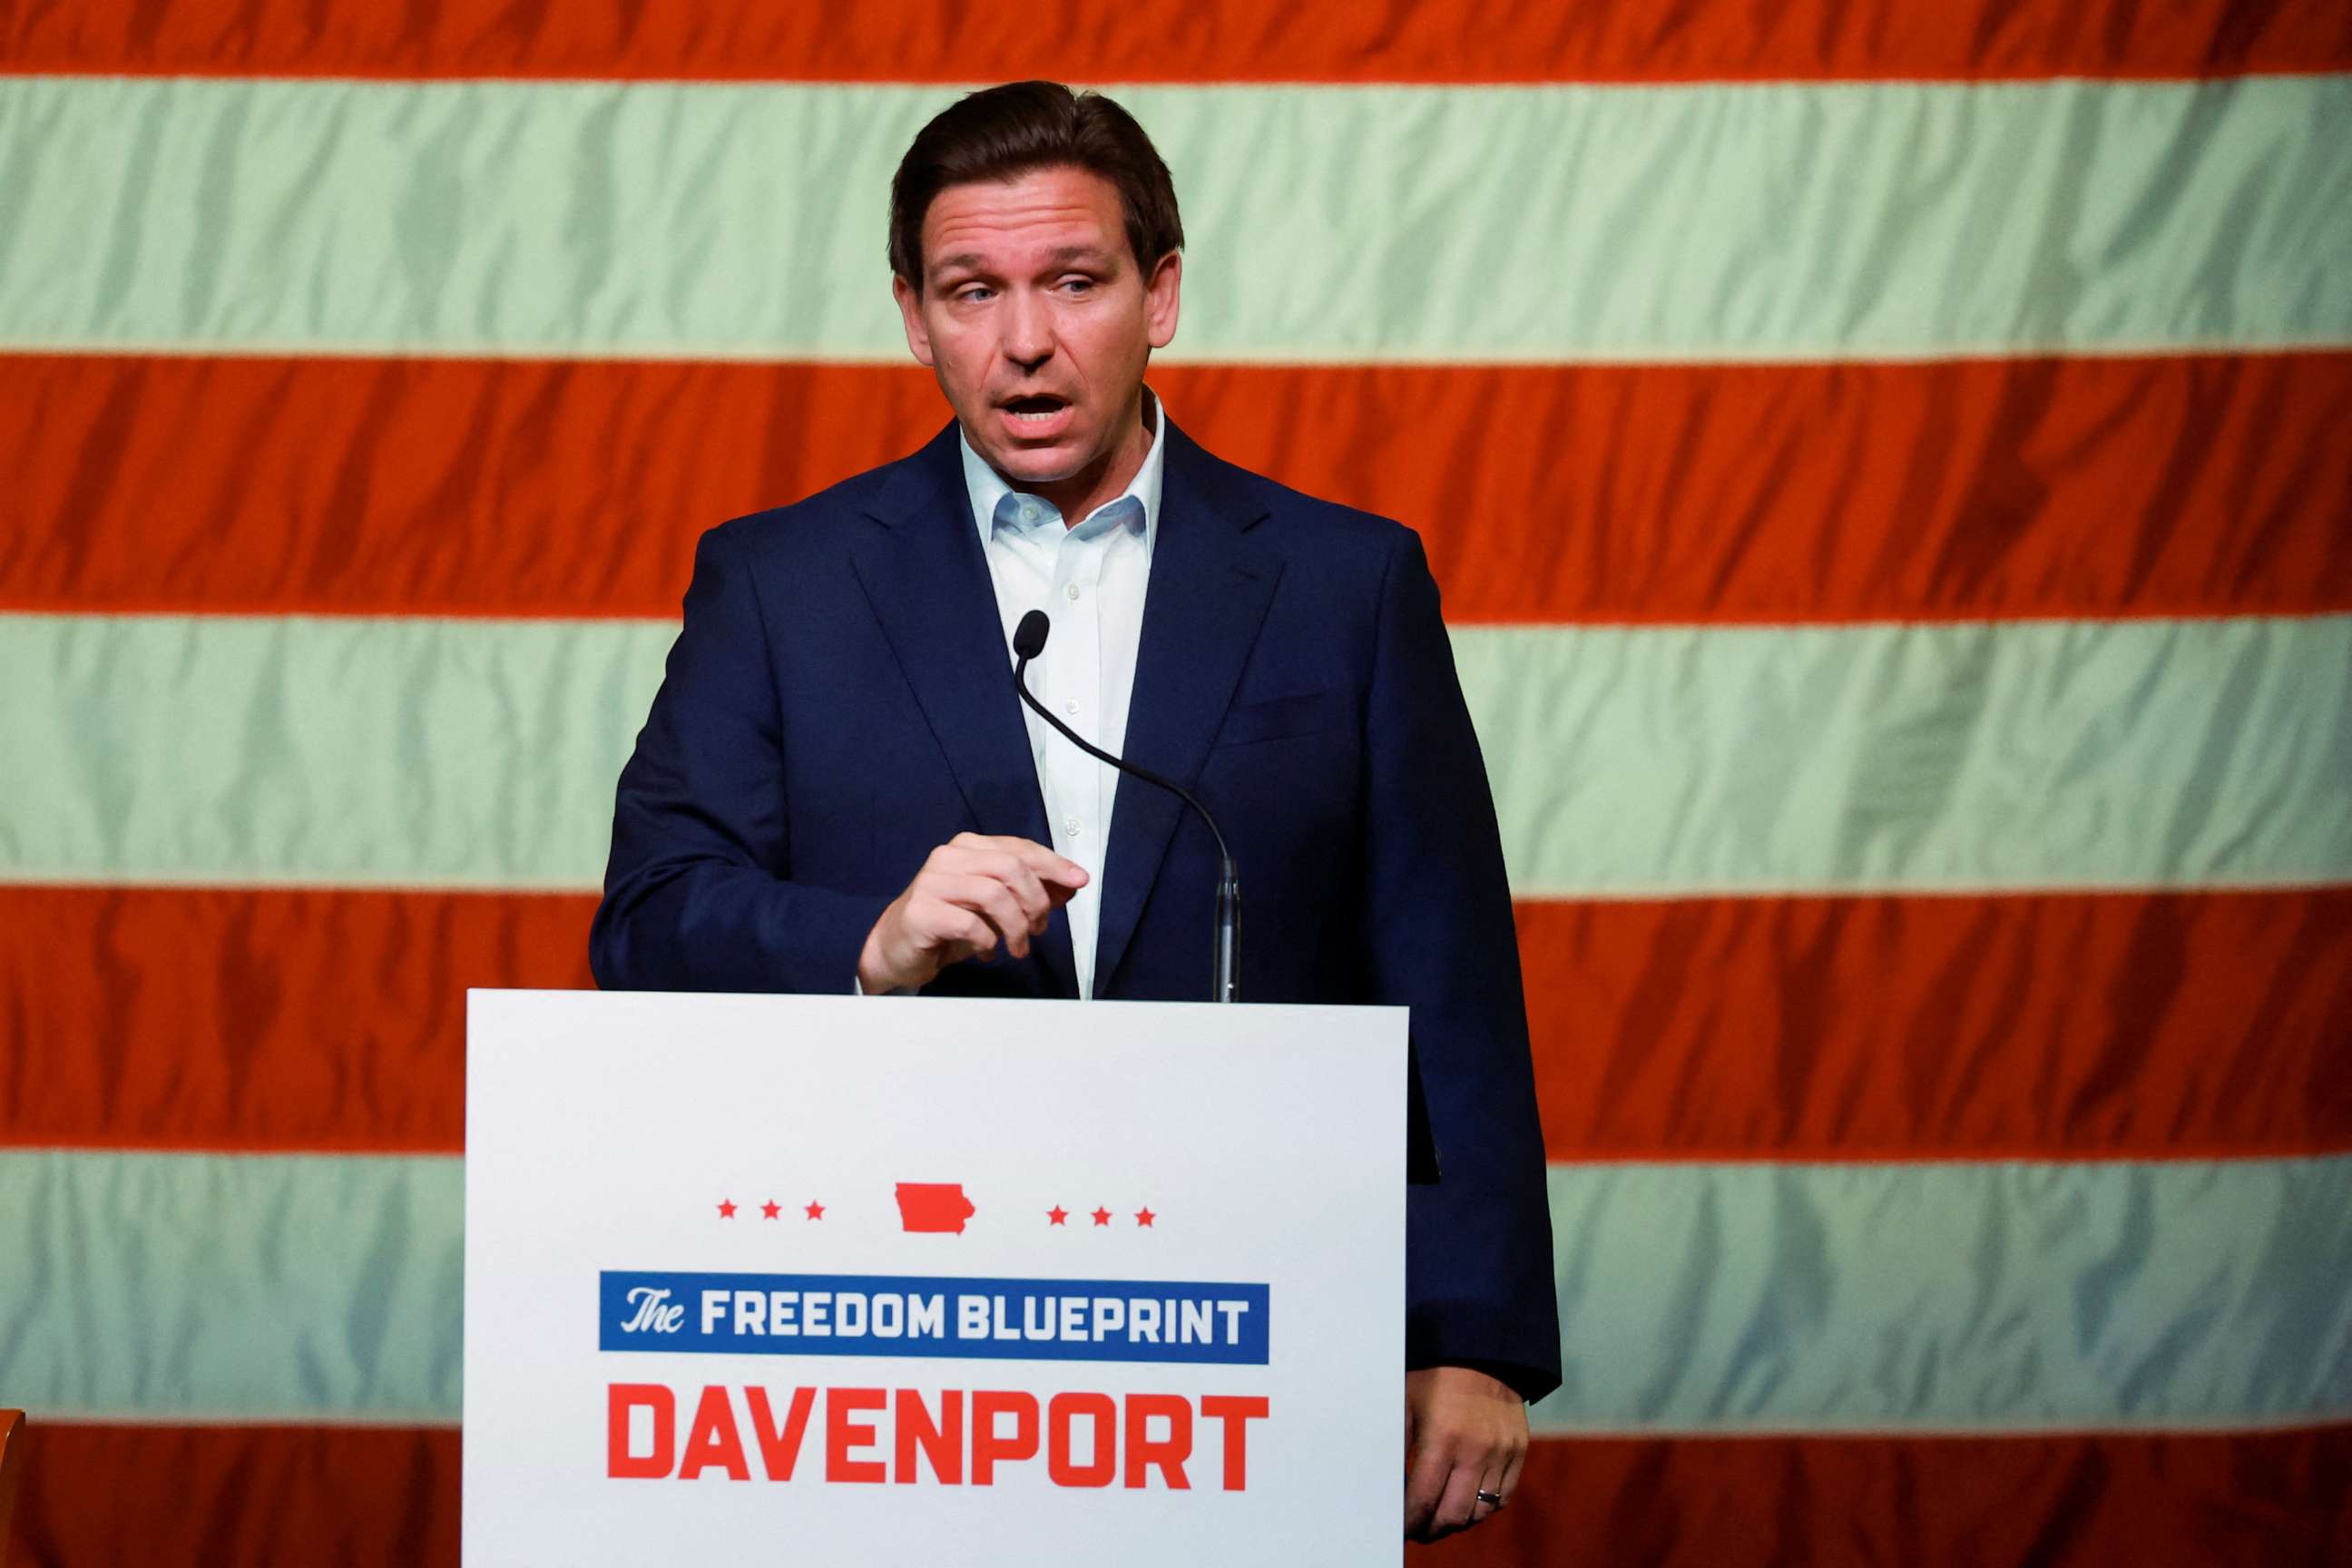 PHOTO: Florida Gov. Ron DeSantis makes his first trip to the early voting state of Iowa for a book tour stop at the Rhythm City Casino Resort in Davenport, Iowa, Mar. 10, 2023.